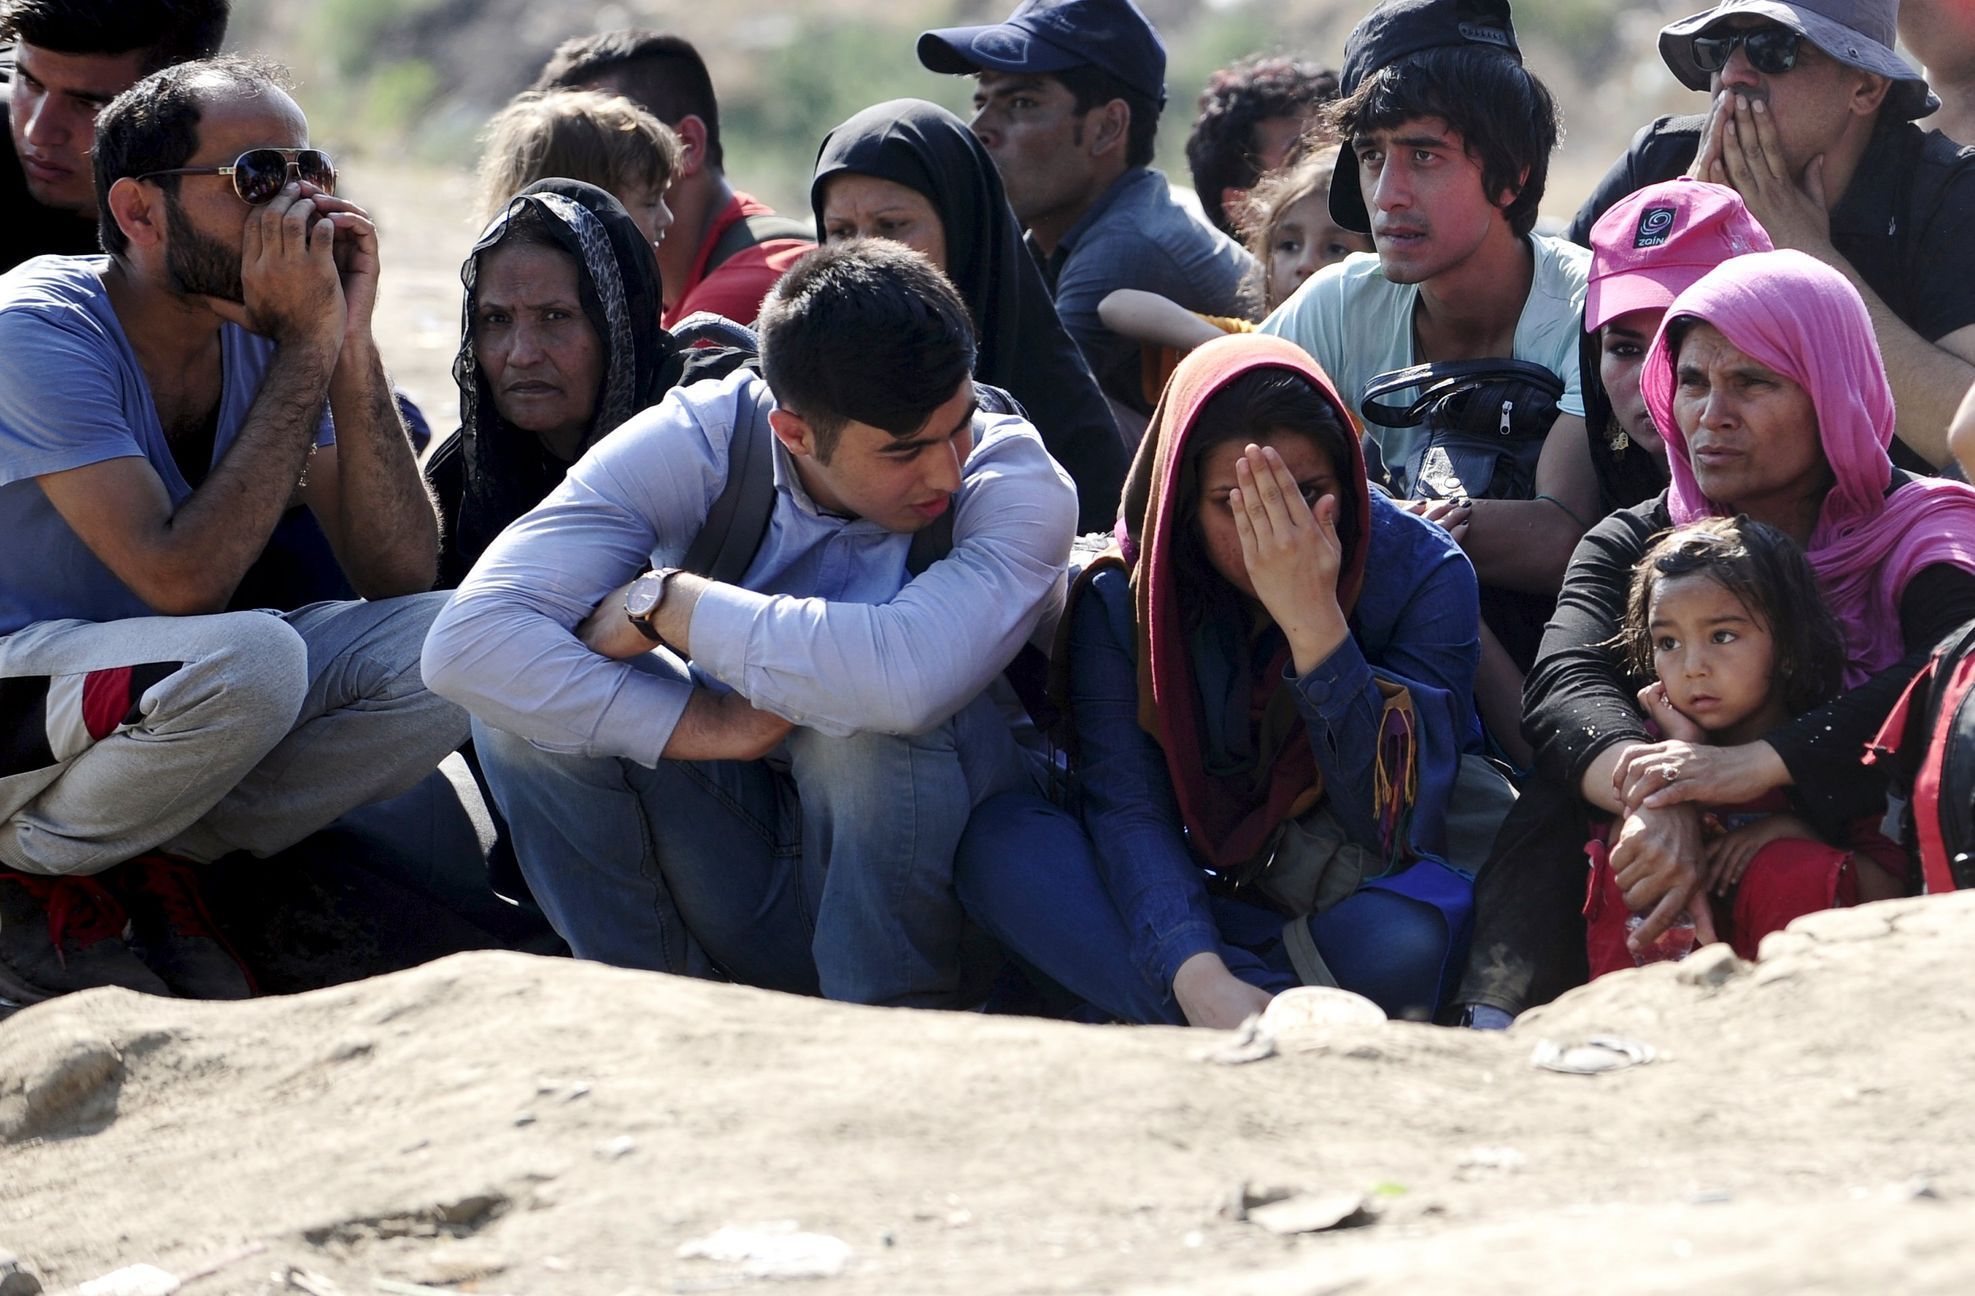 Migrants wait on the Greek side of the border to enter Macedonia near Gevgelija, Macedonia, en route to northern Europe